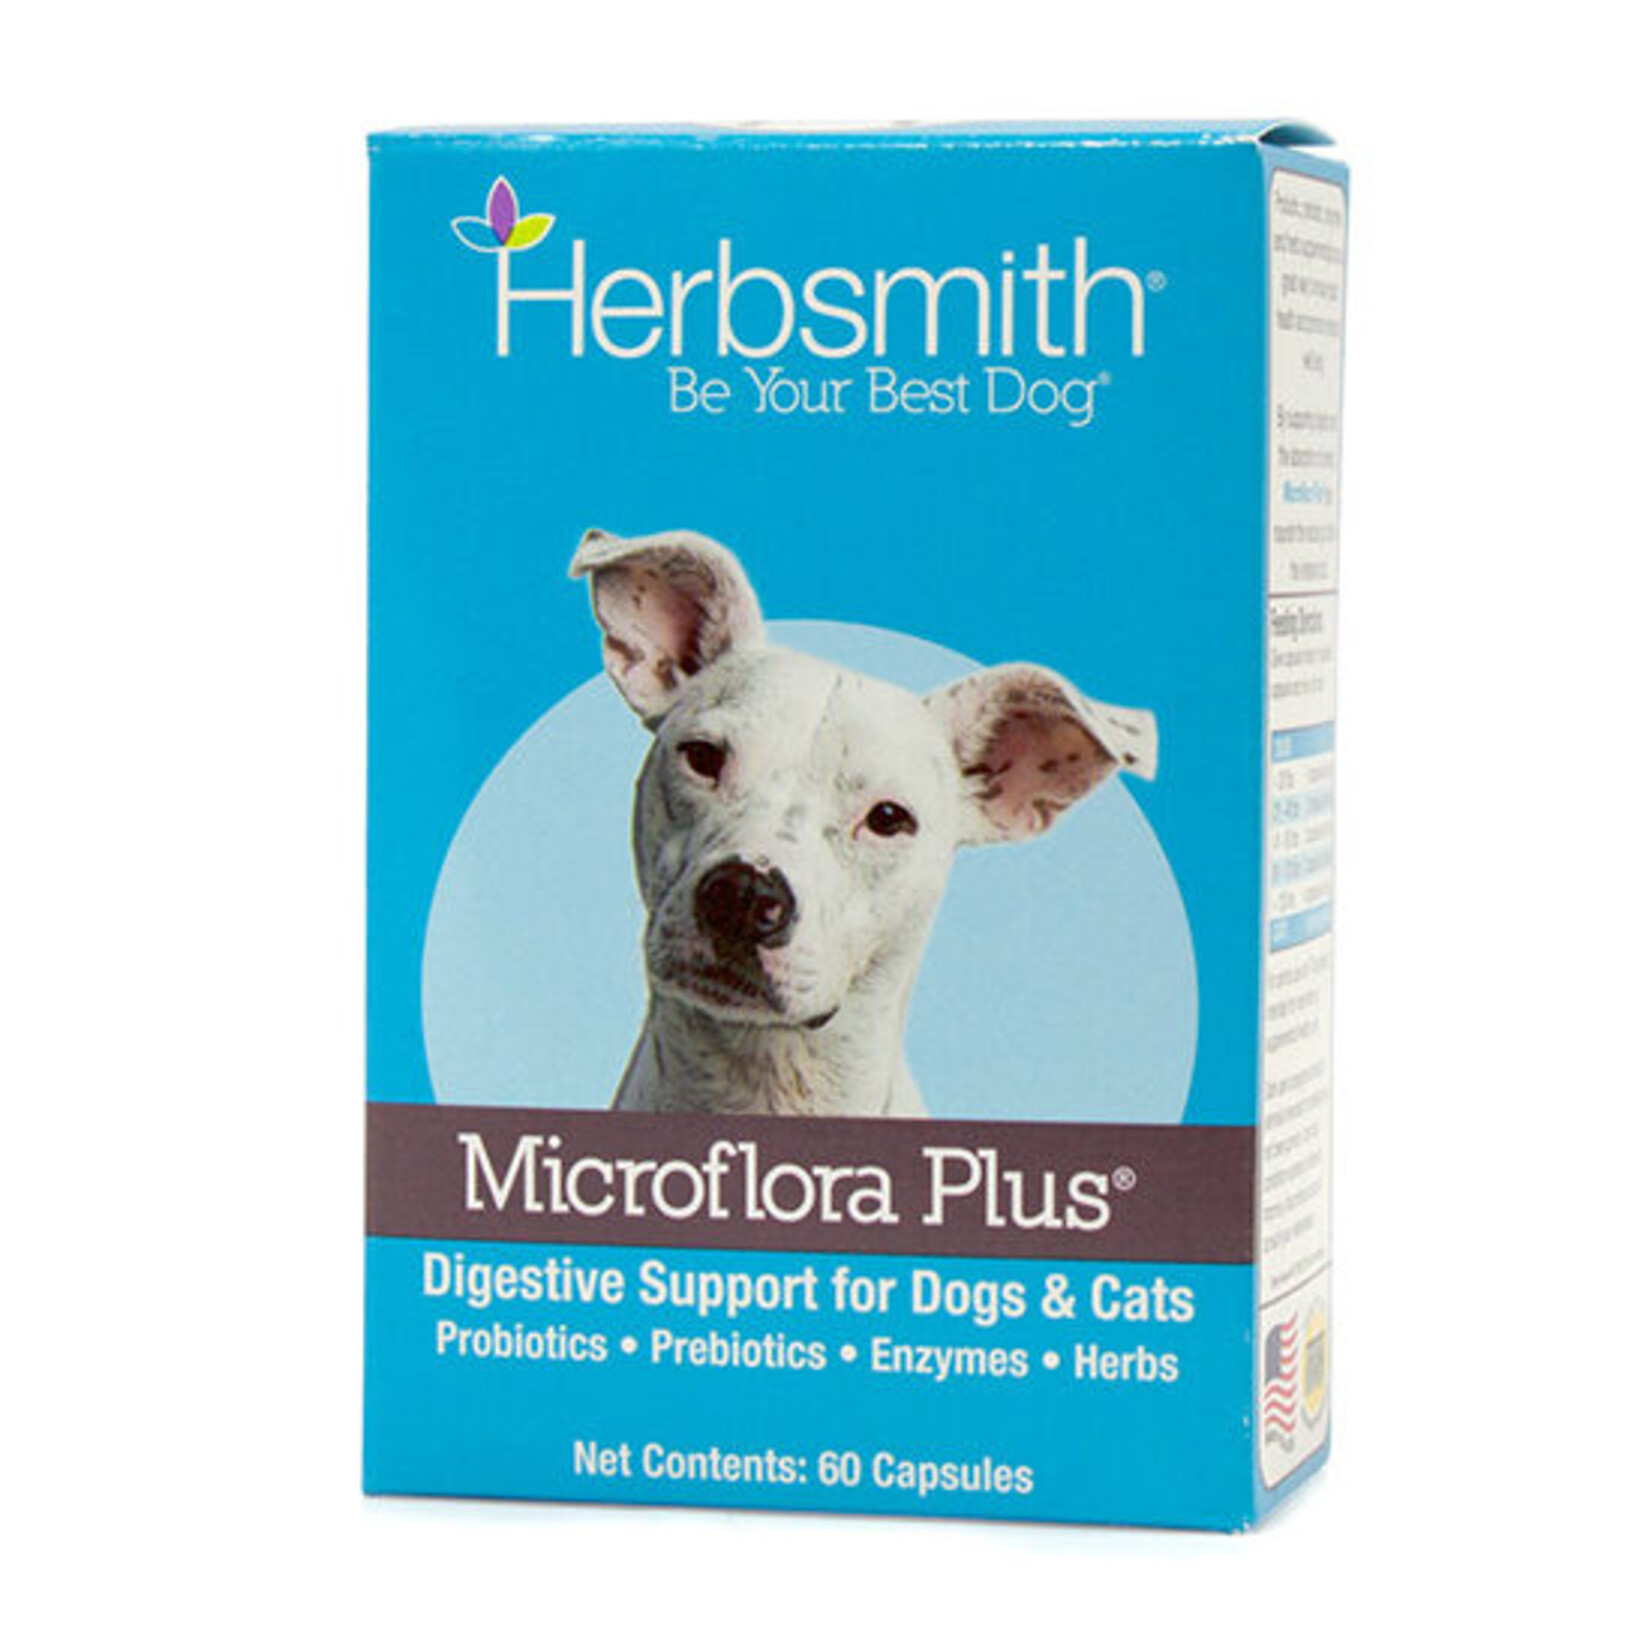 Herbsmith Microflora Plus - Digestion Supplement for Dogs & Cats - Herbsmith